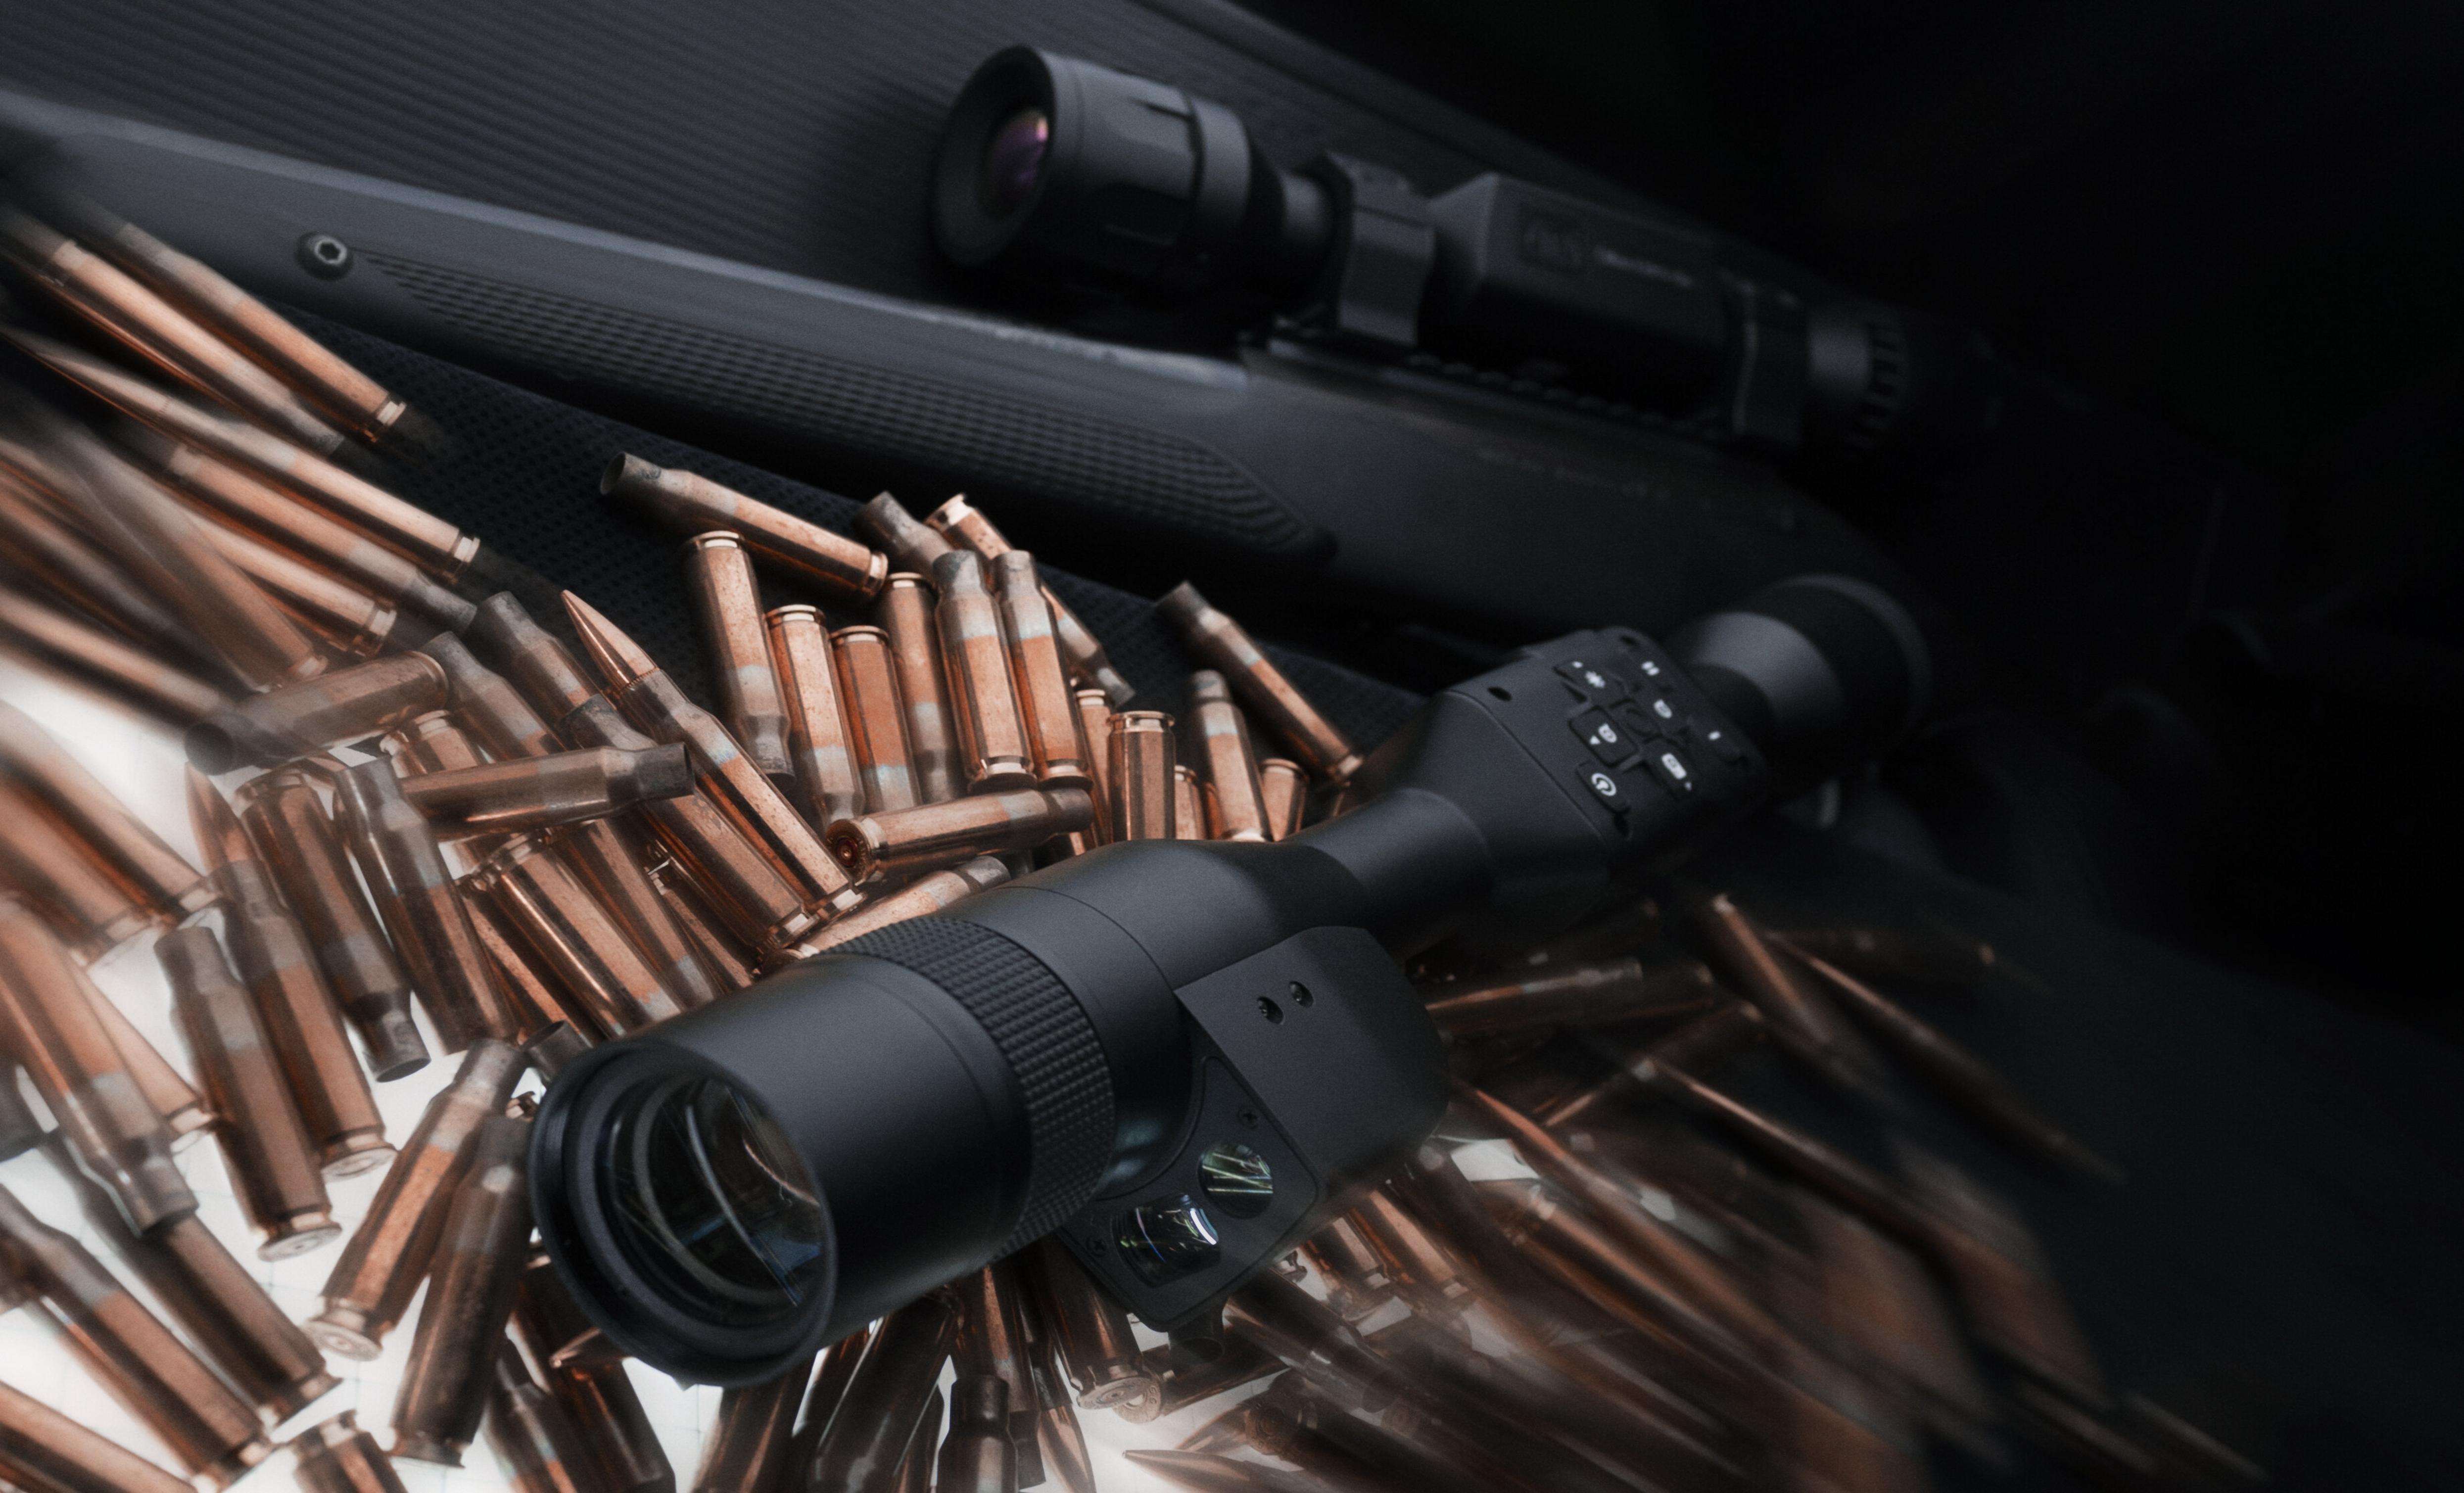 Field Test: High-End vs. Budget Thermal Imaging Scopes for Hunting